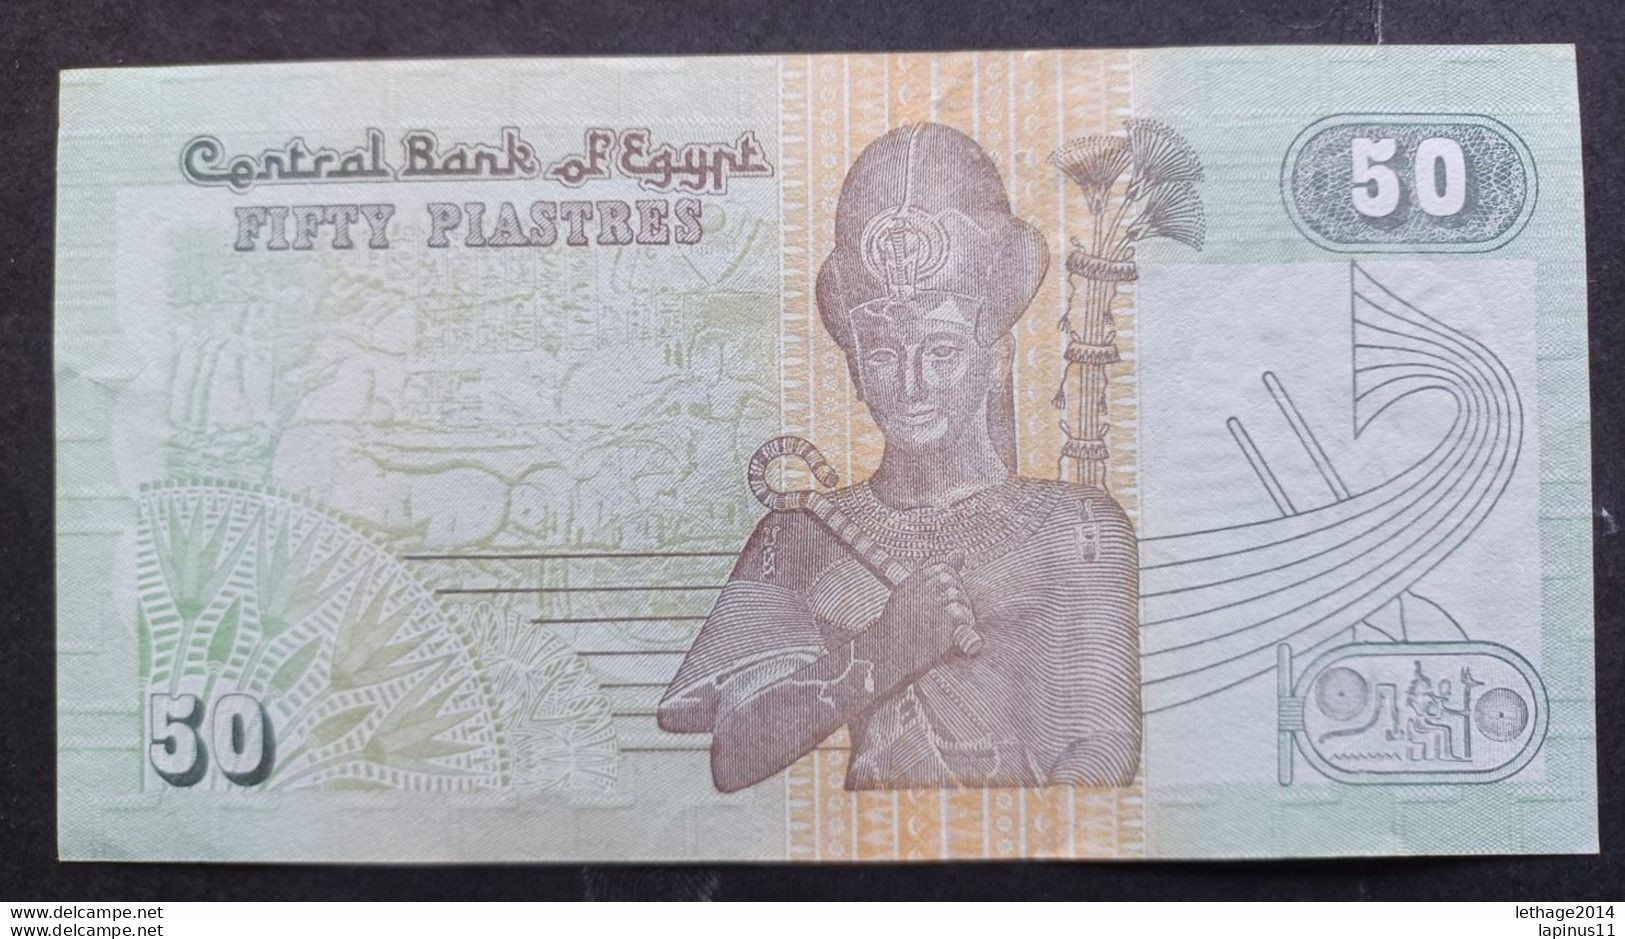 BANKNOTE EGYPT EGYPT 50 PIASTRES 1992 UNCIRCULATED SUPERB - Egypte